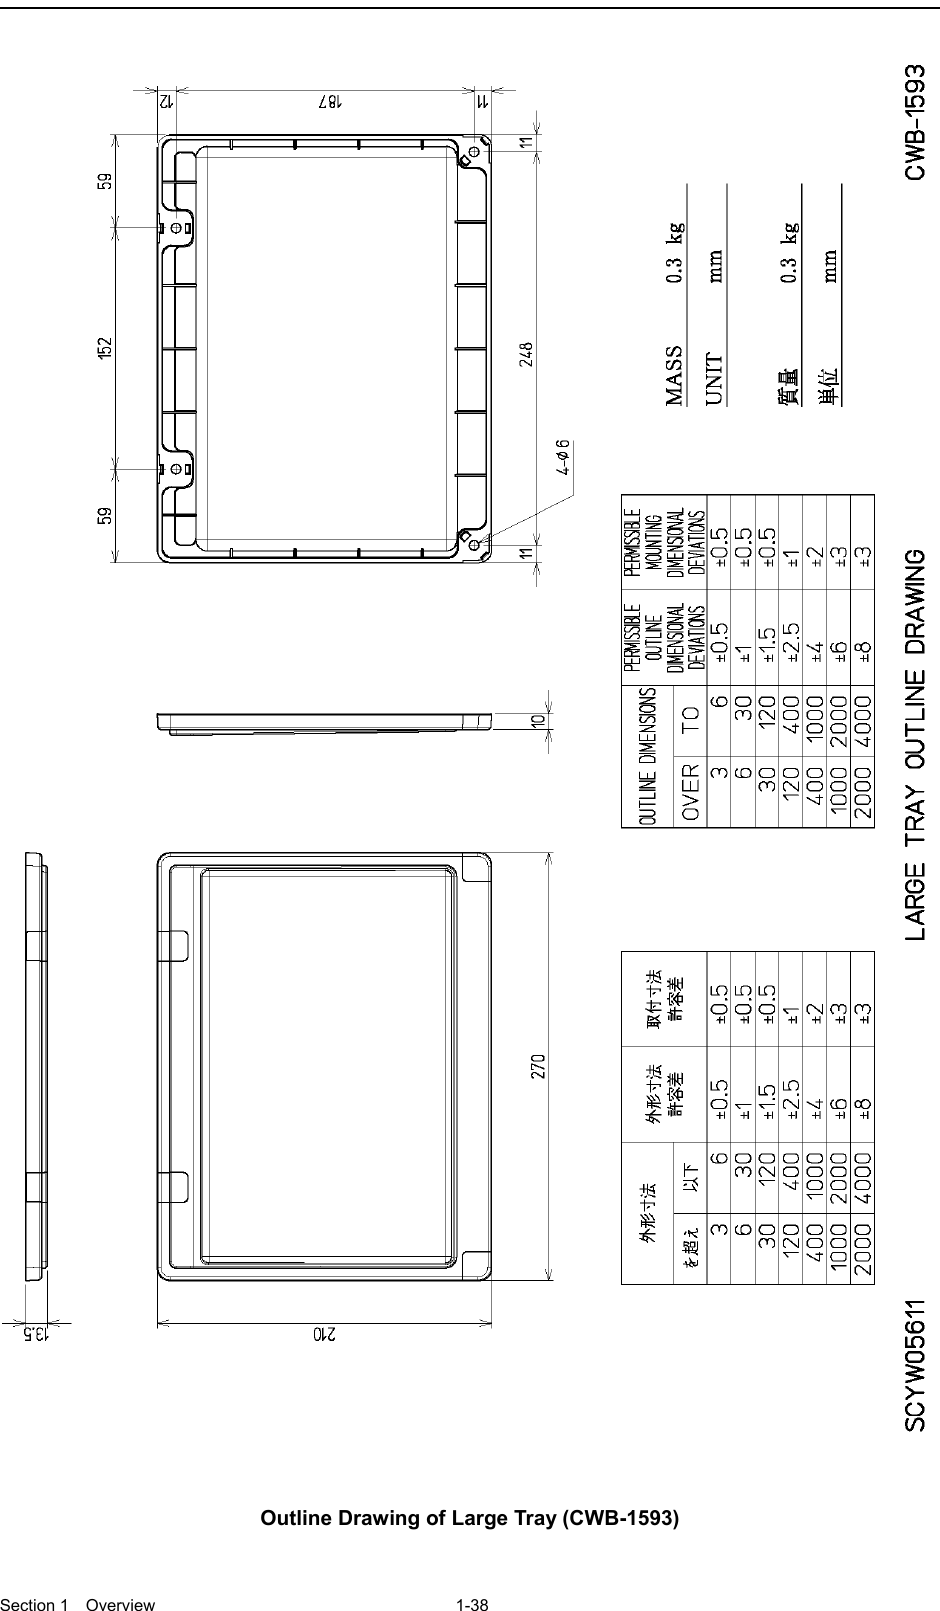  Section 1  Overview 1-38    Outline Drawing of Large Tray (CWB-1593)  